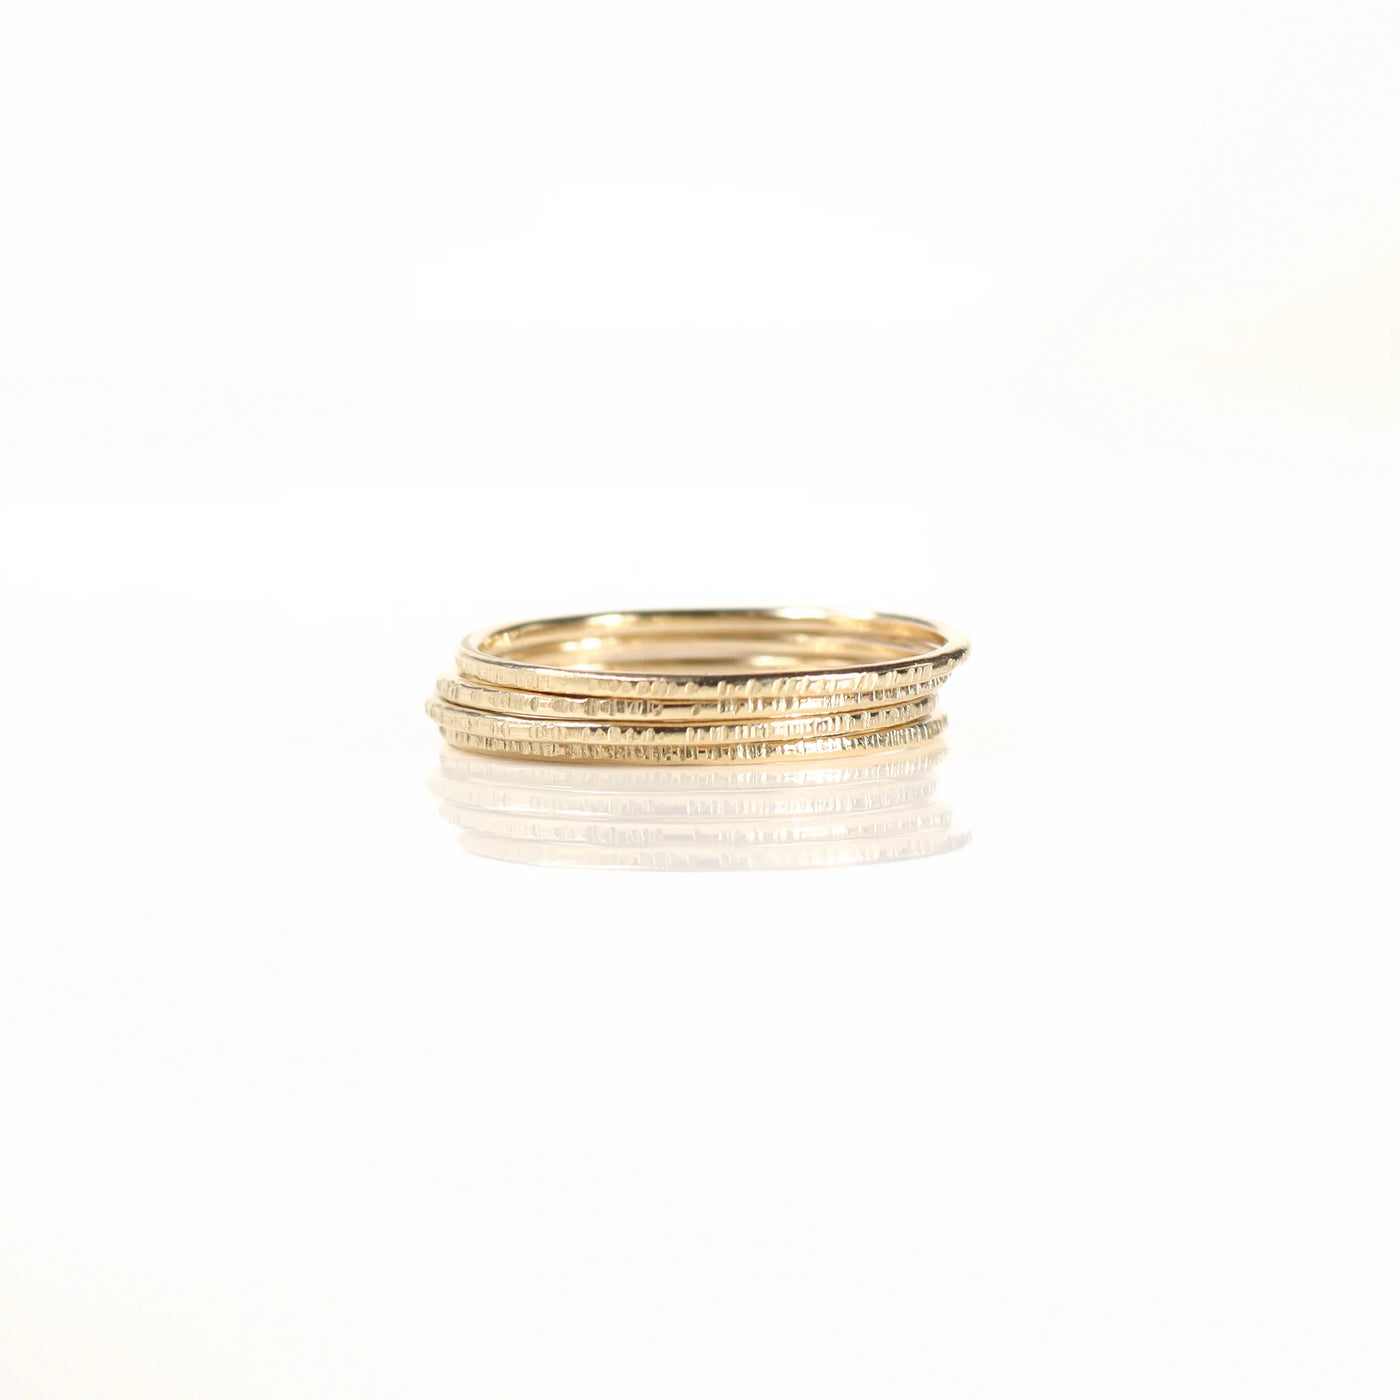 Solid 9ct Gold Bark Textured Ring